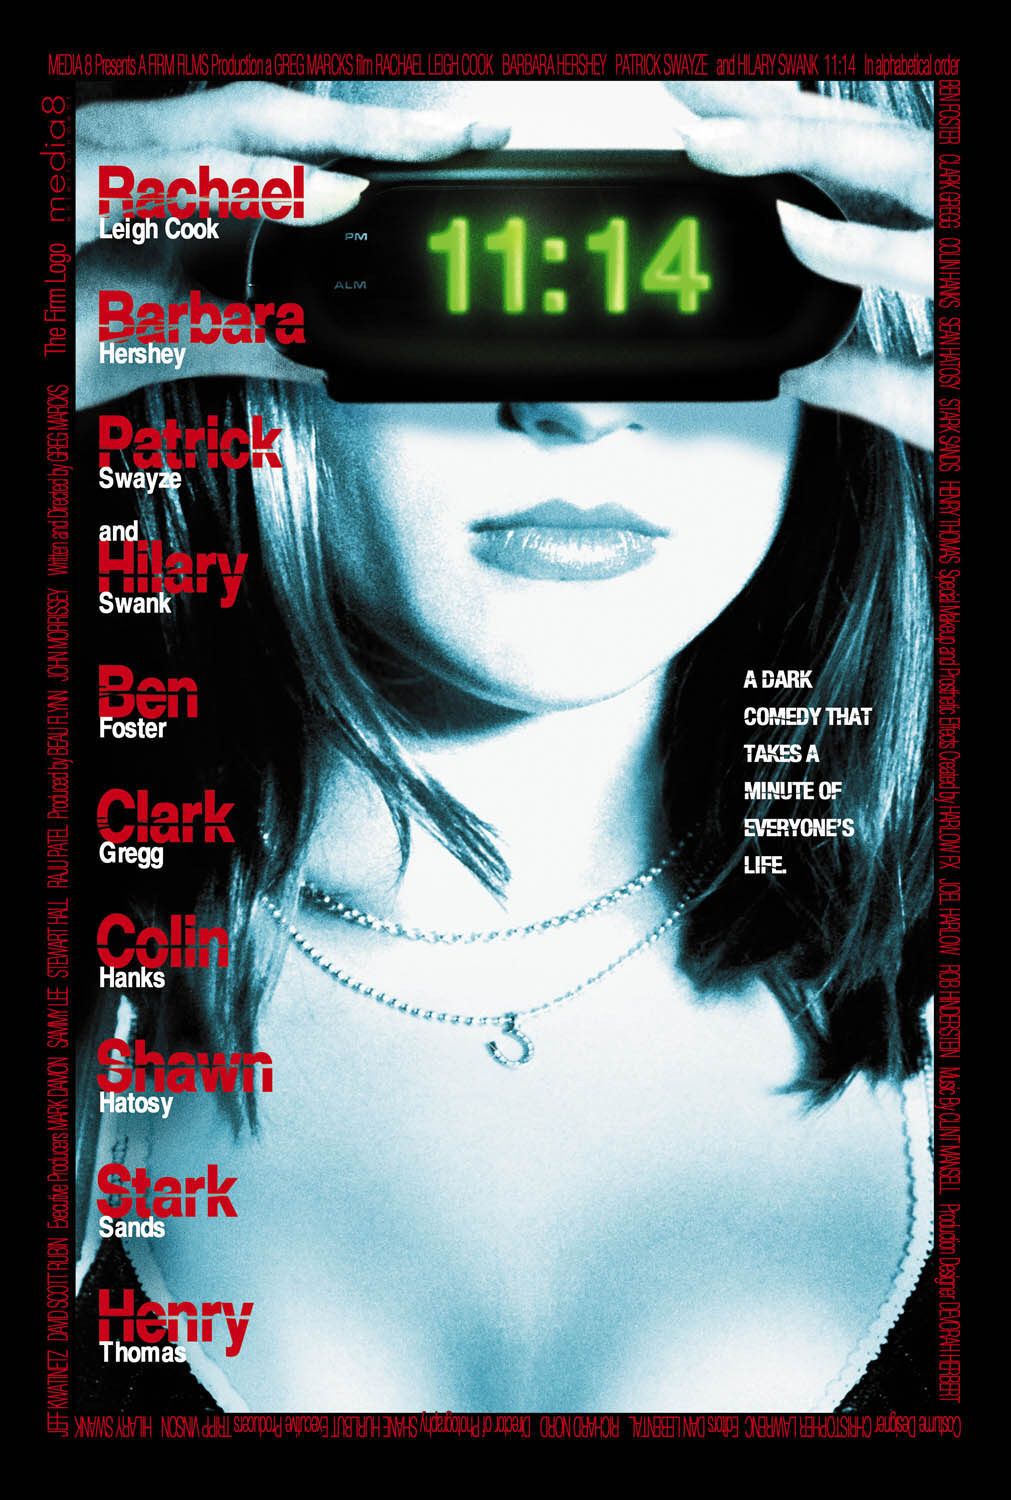 Extra Large Movie Poster Image for 11:14 